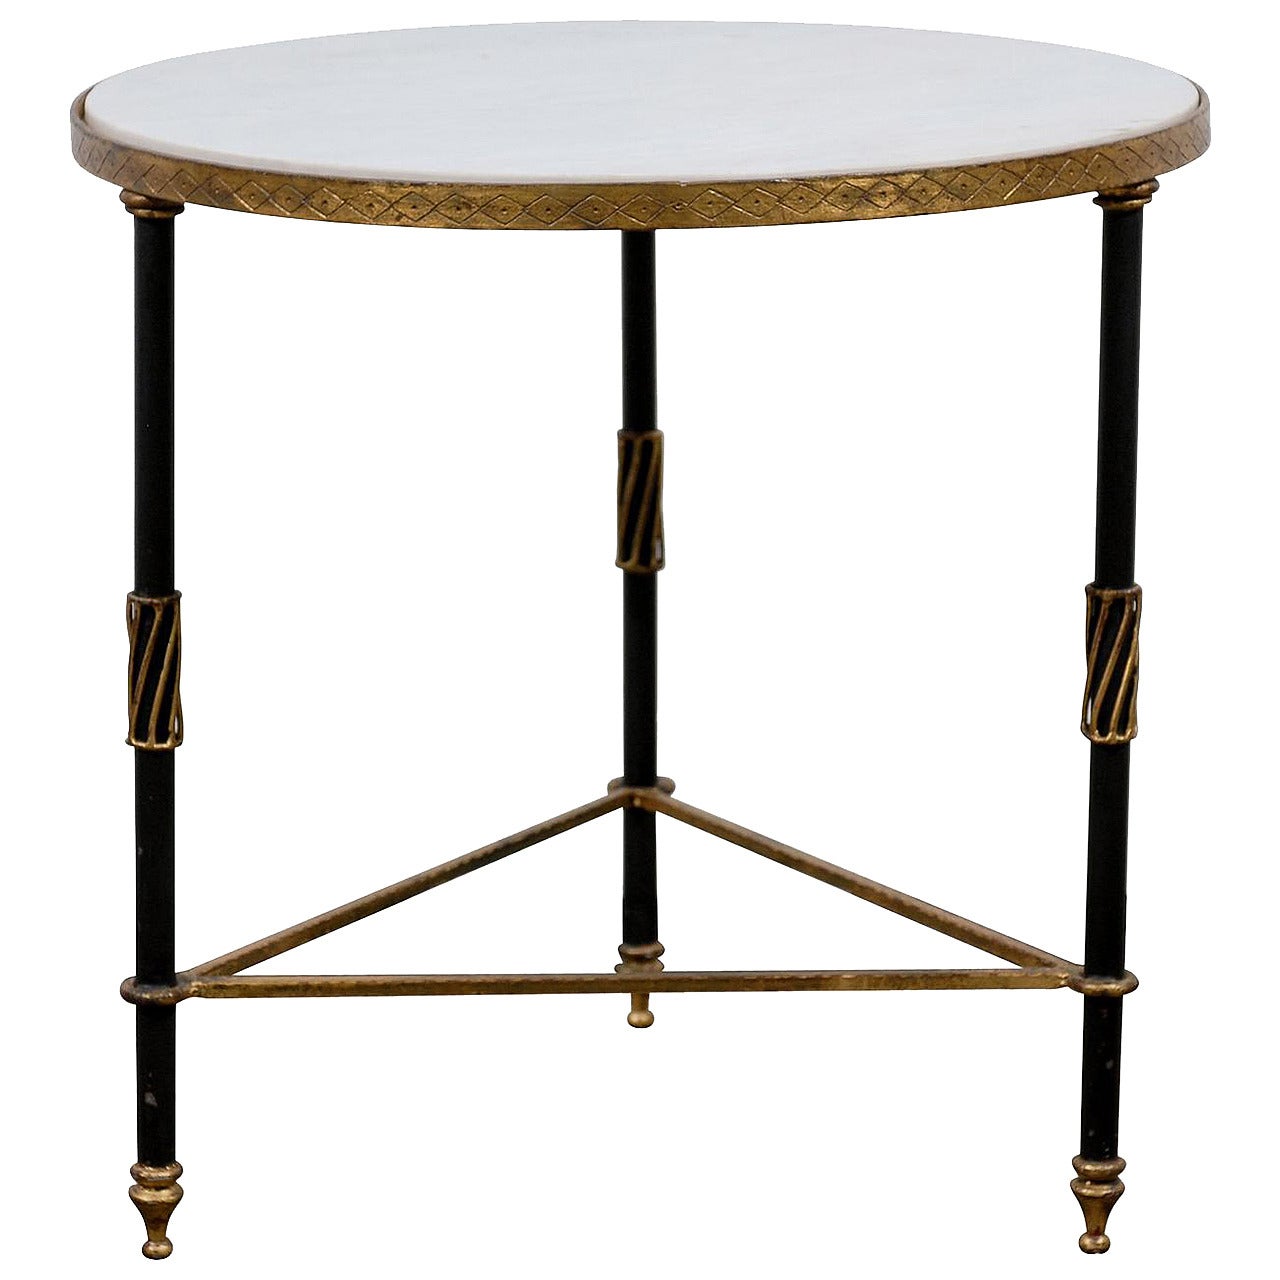 Palladio Tripod Base Table With Marble Top